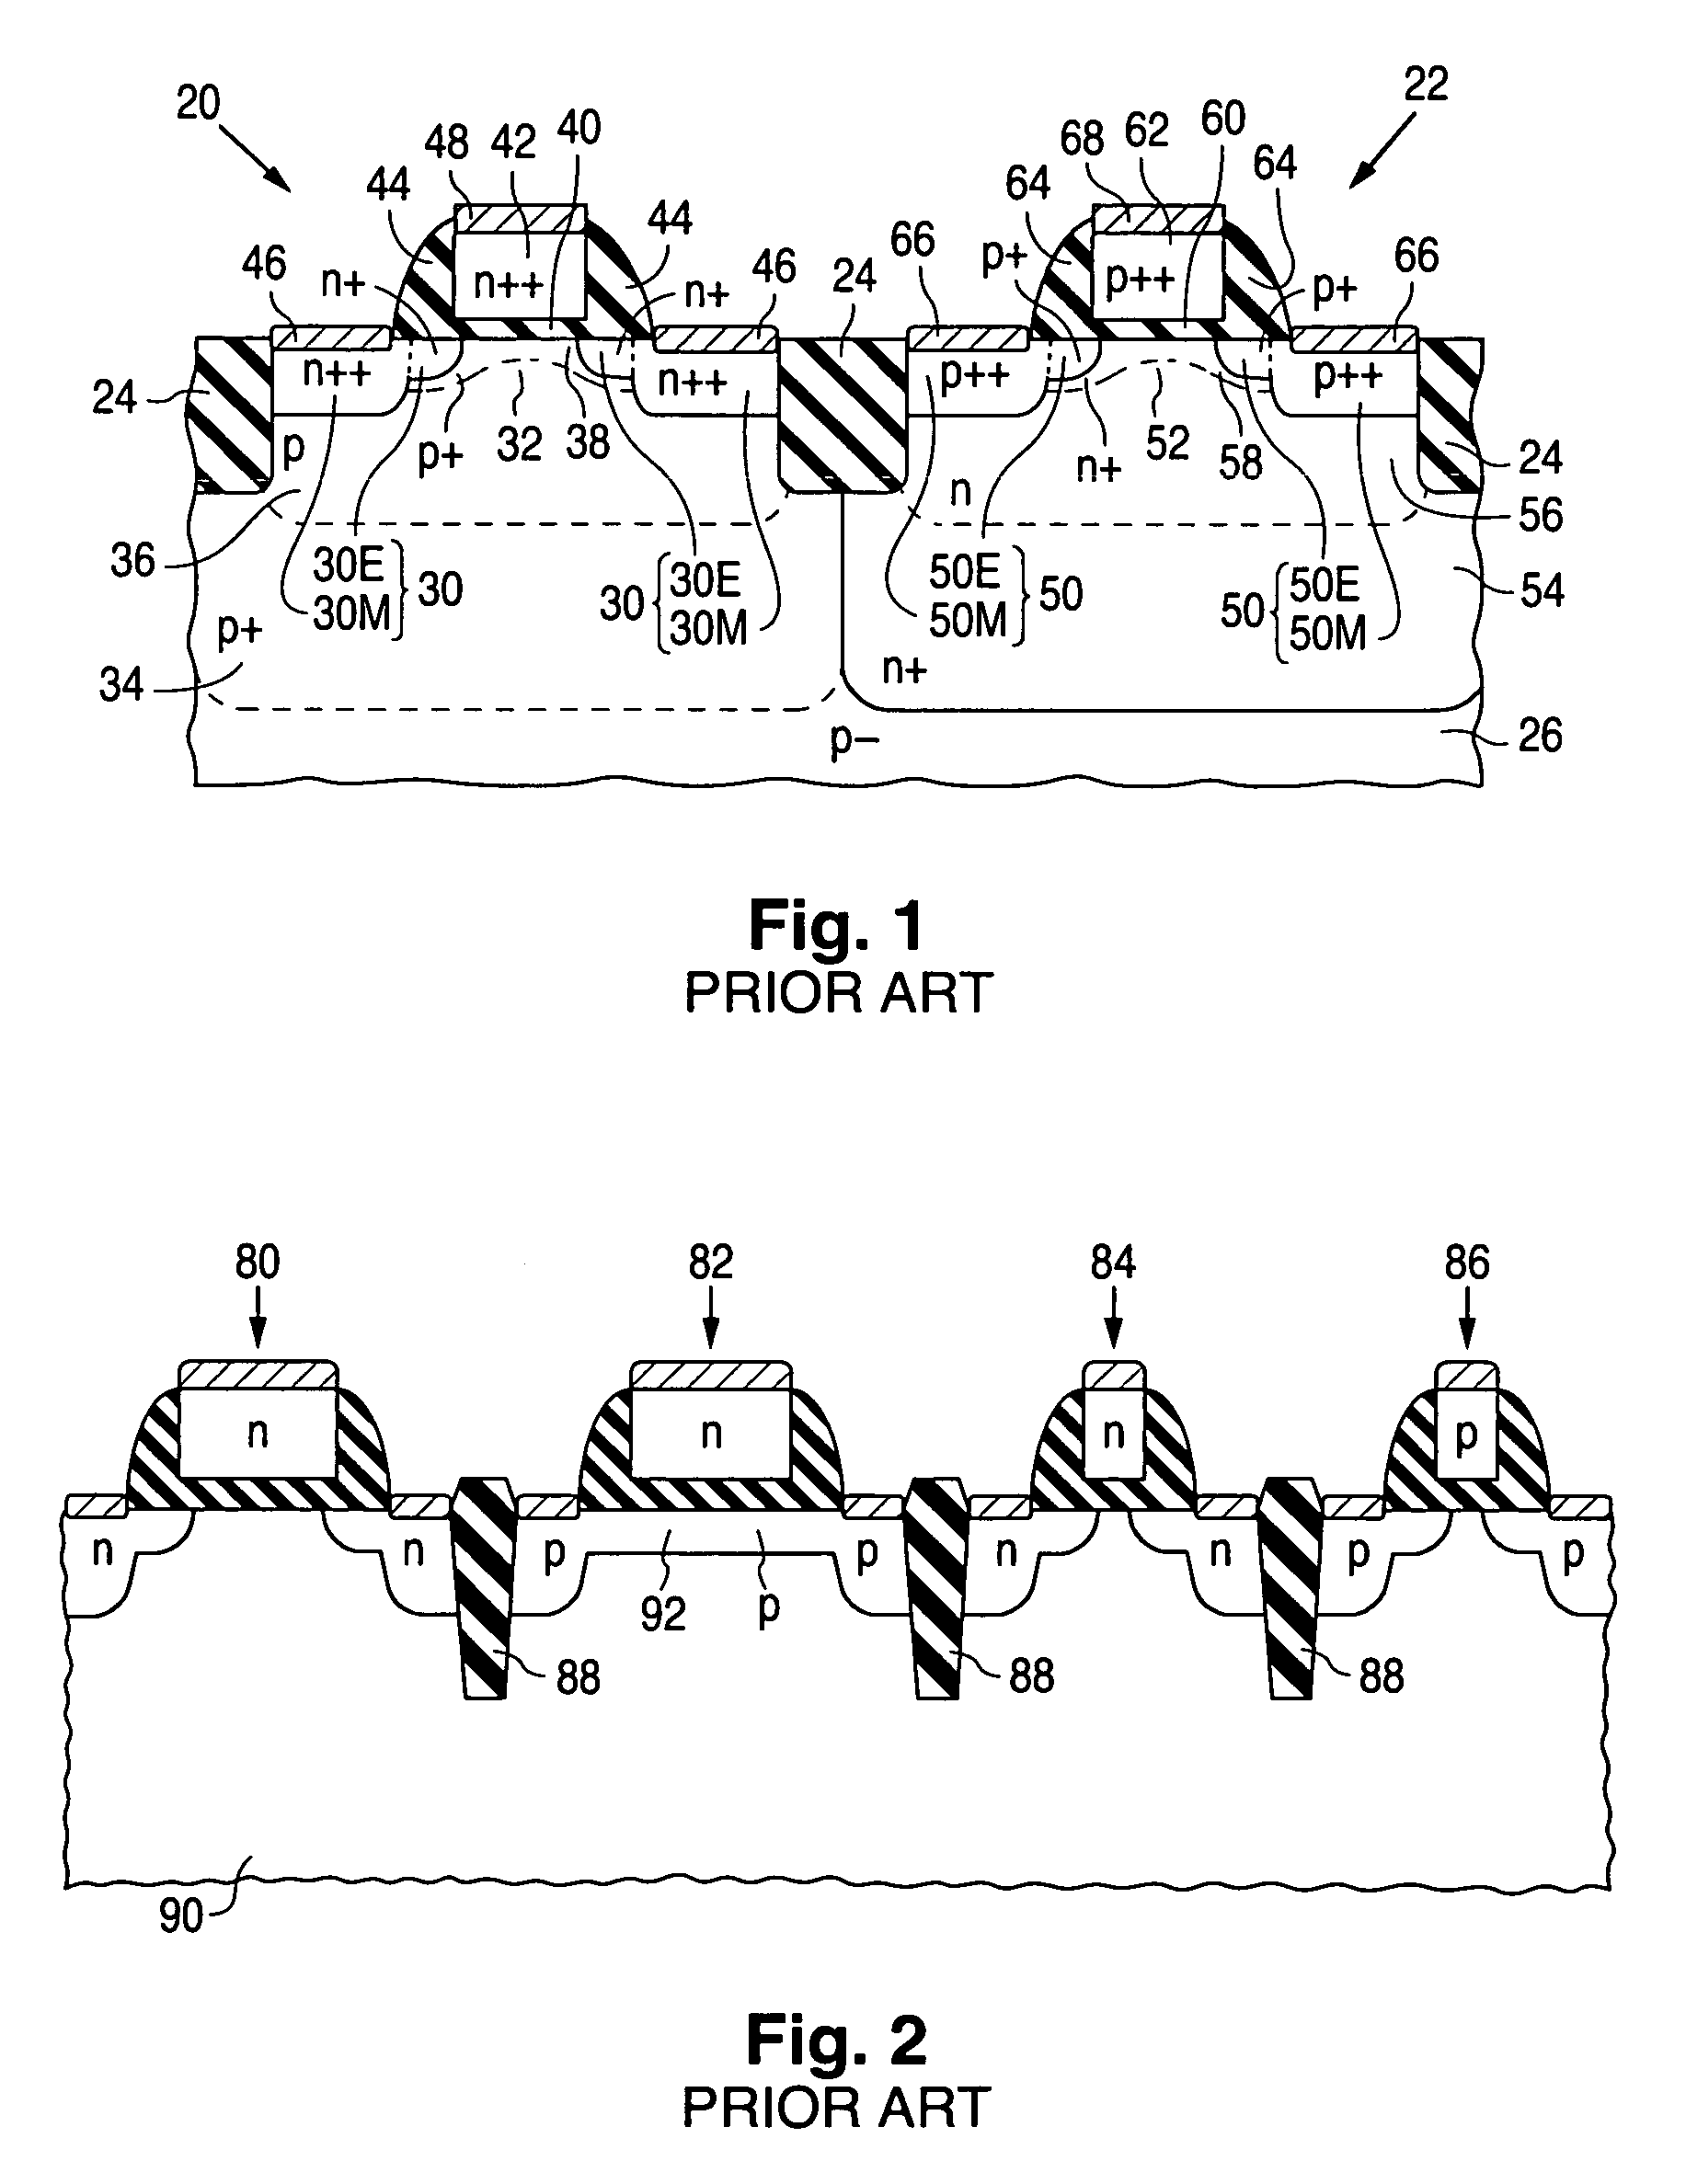 Fabrication of semiconductor structure having N-channel channel-junction field-effect transistor